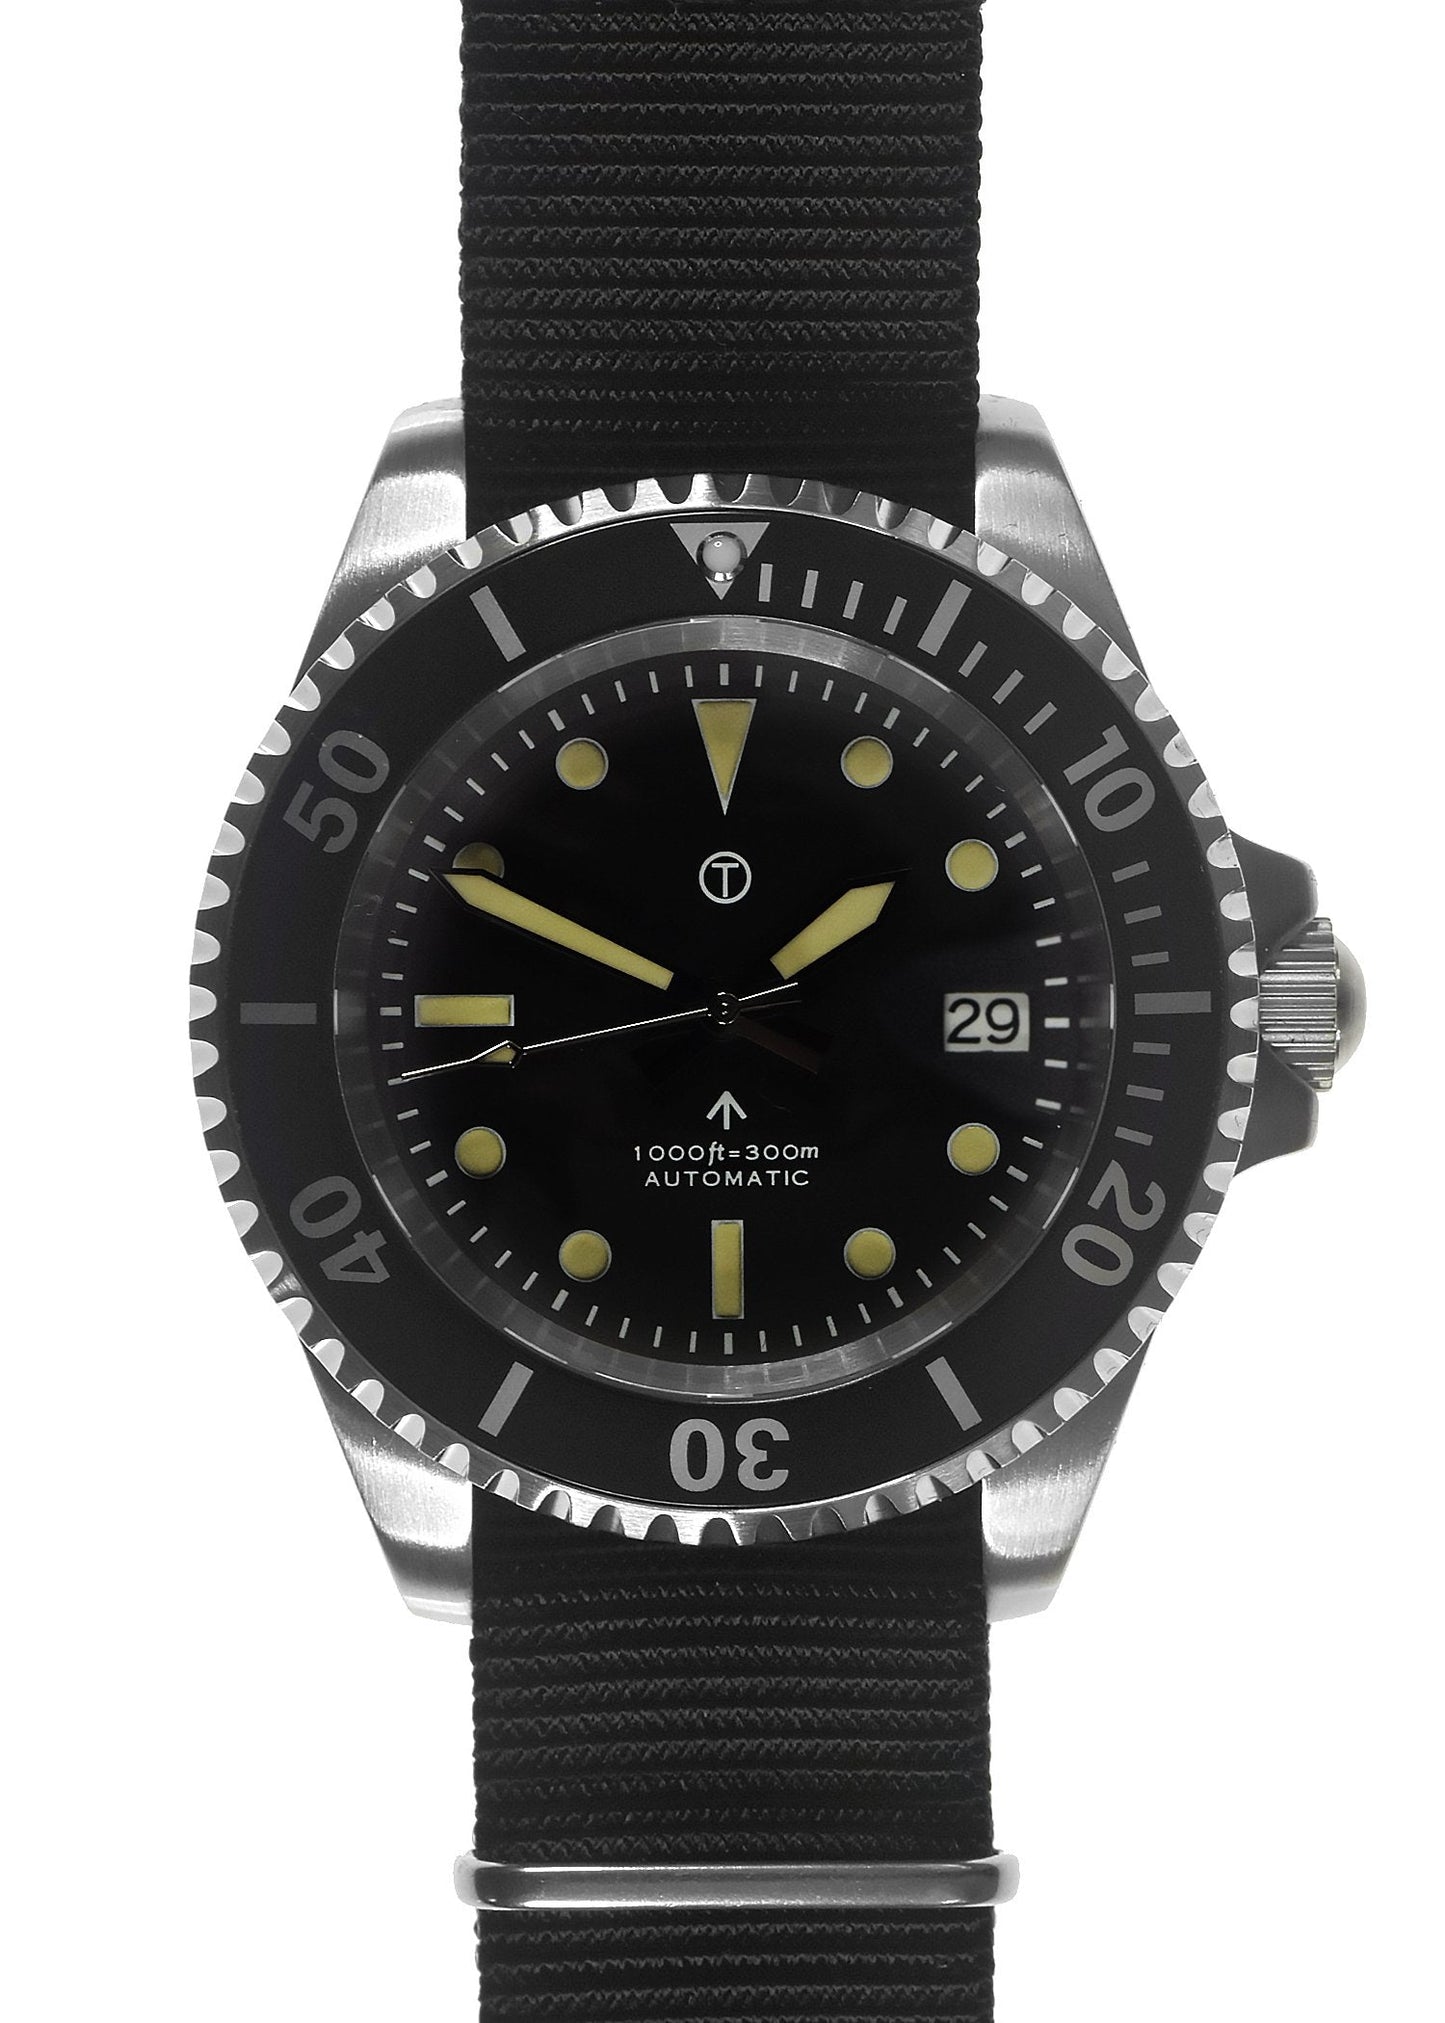 MWC 21 Jewel 1980s Pattern 300m Automatic Military Divers Watch with Sapphire Crystal and a Black and a Grey NATO Strap